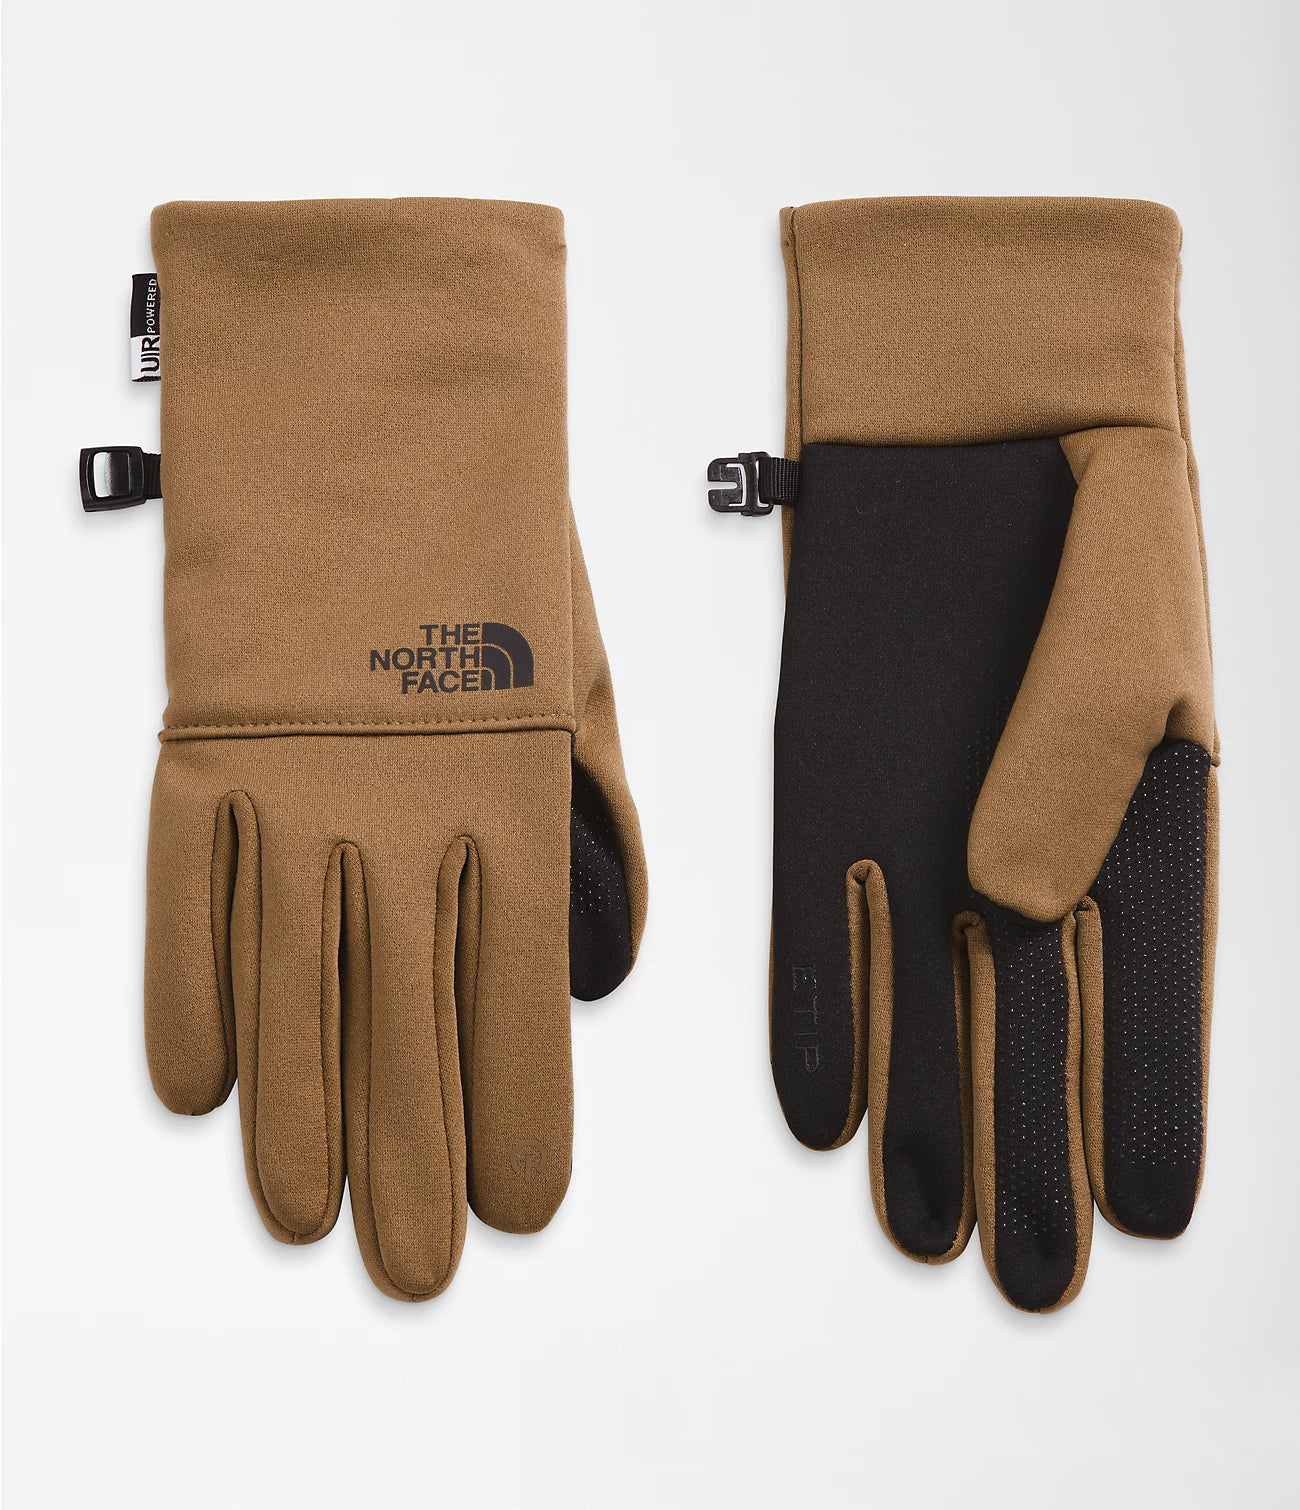 Etip™ Recycled Glove